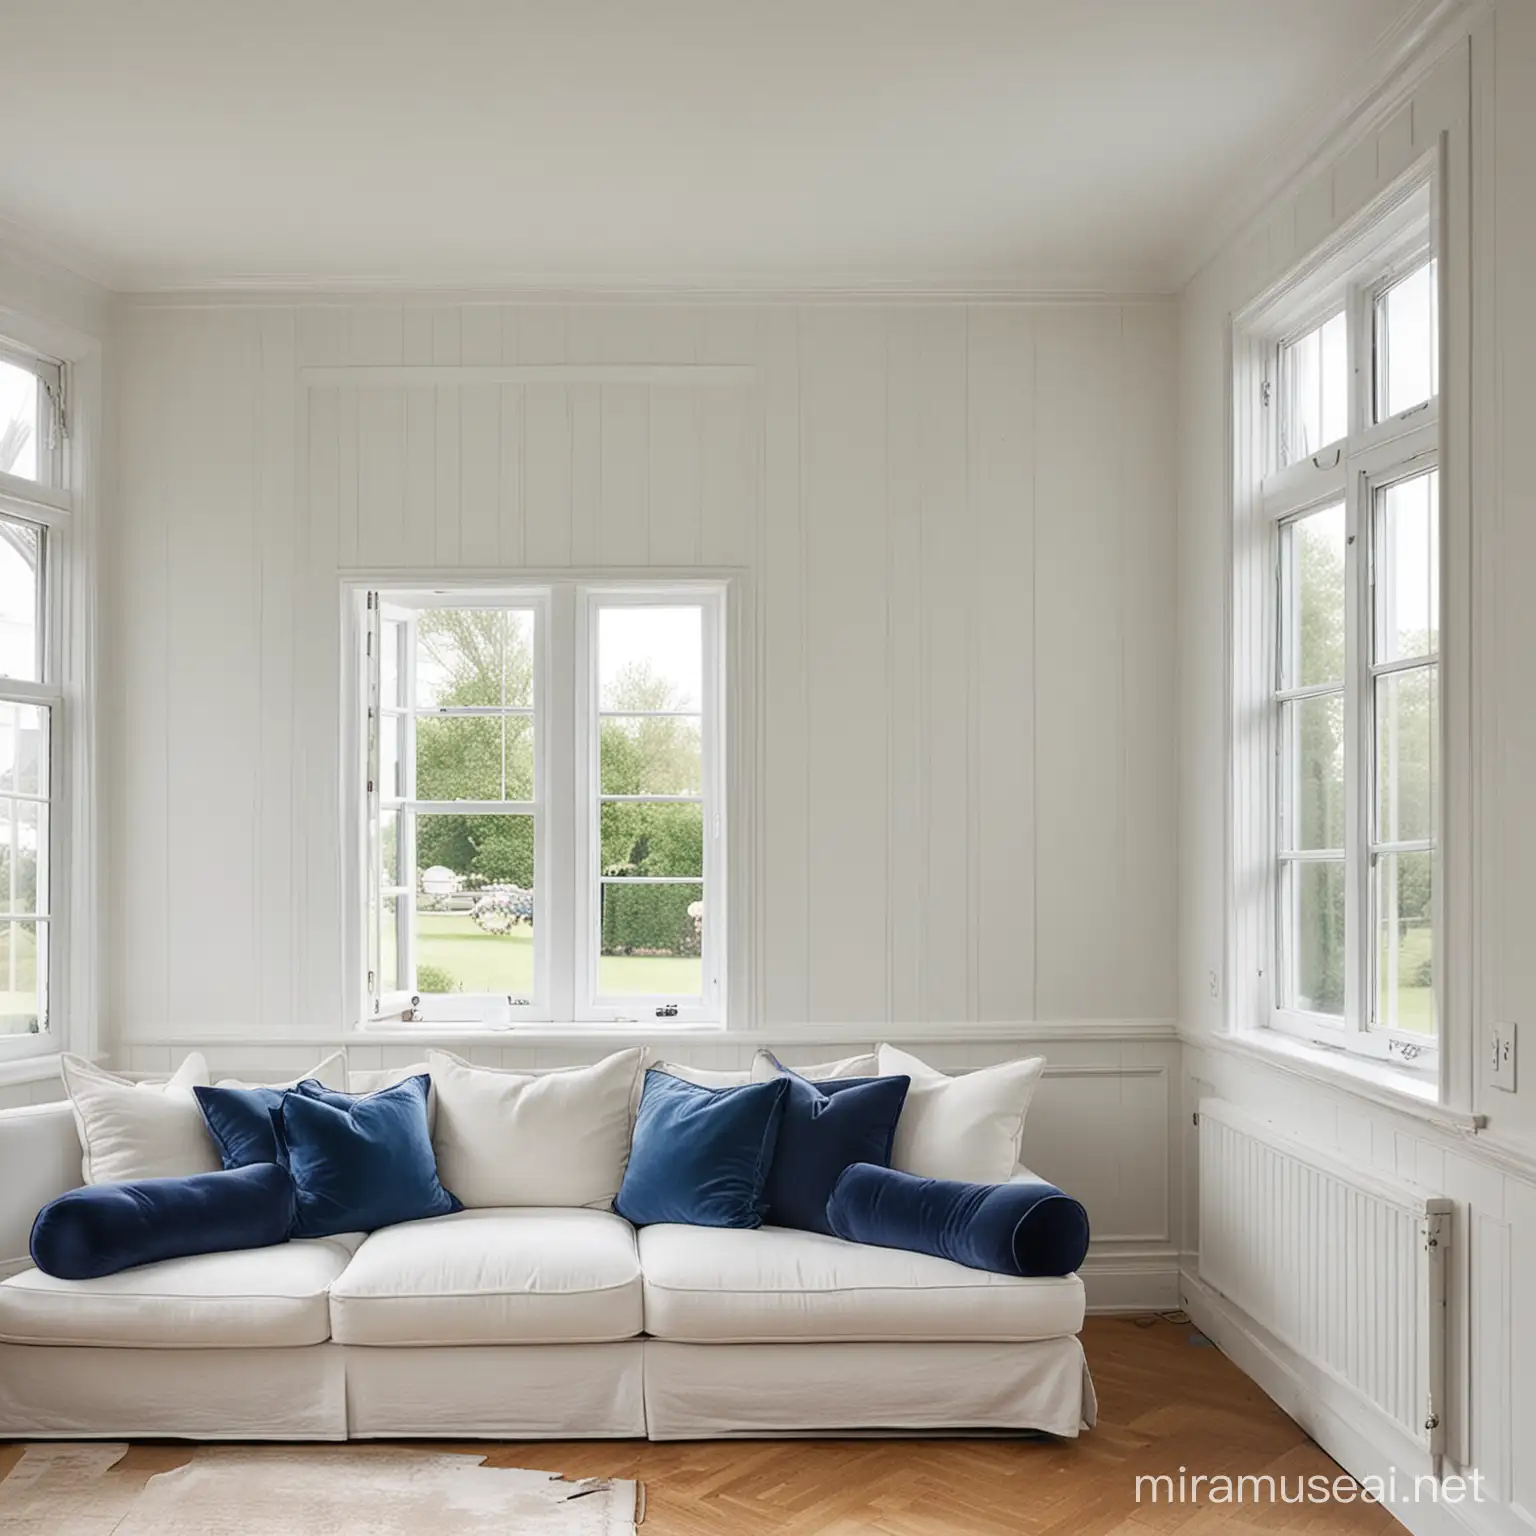 Cozy Living Room with Blue Accents and White Panelled Walls